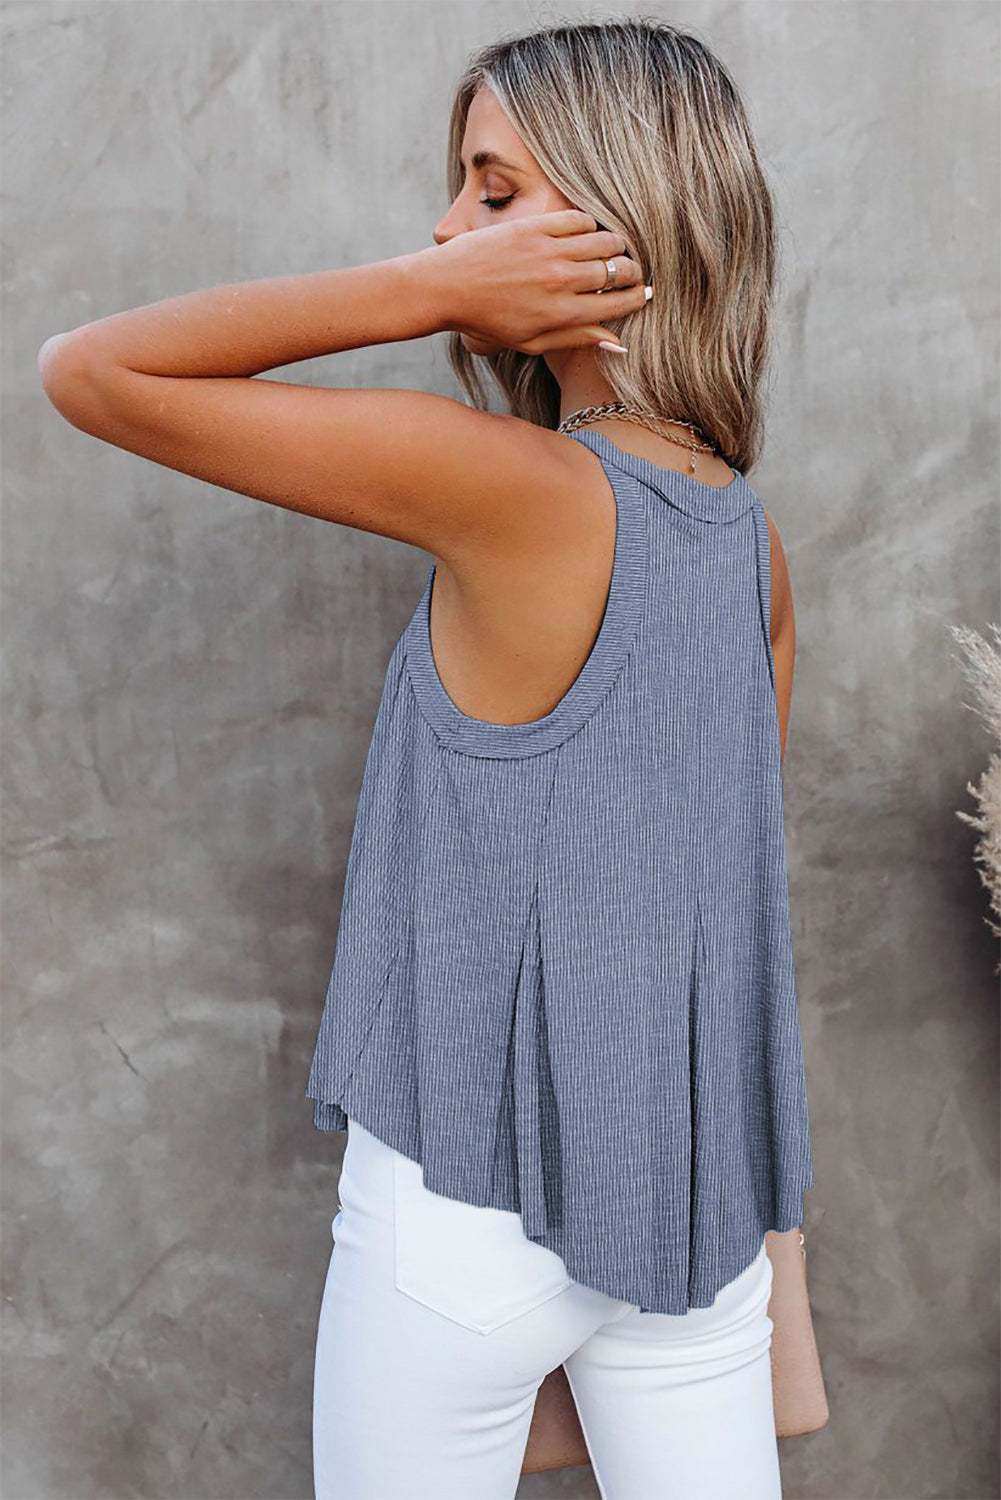 Knitted Flowy Sleeveless Tops